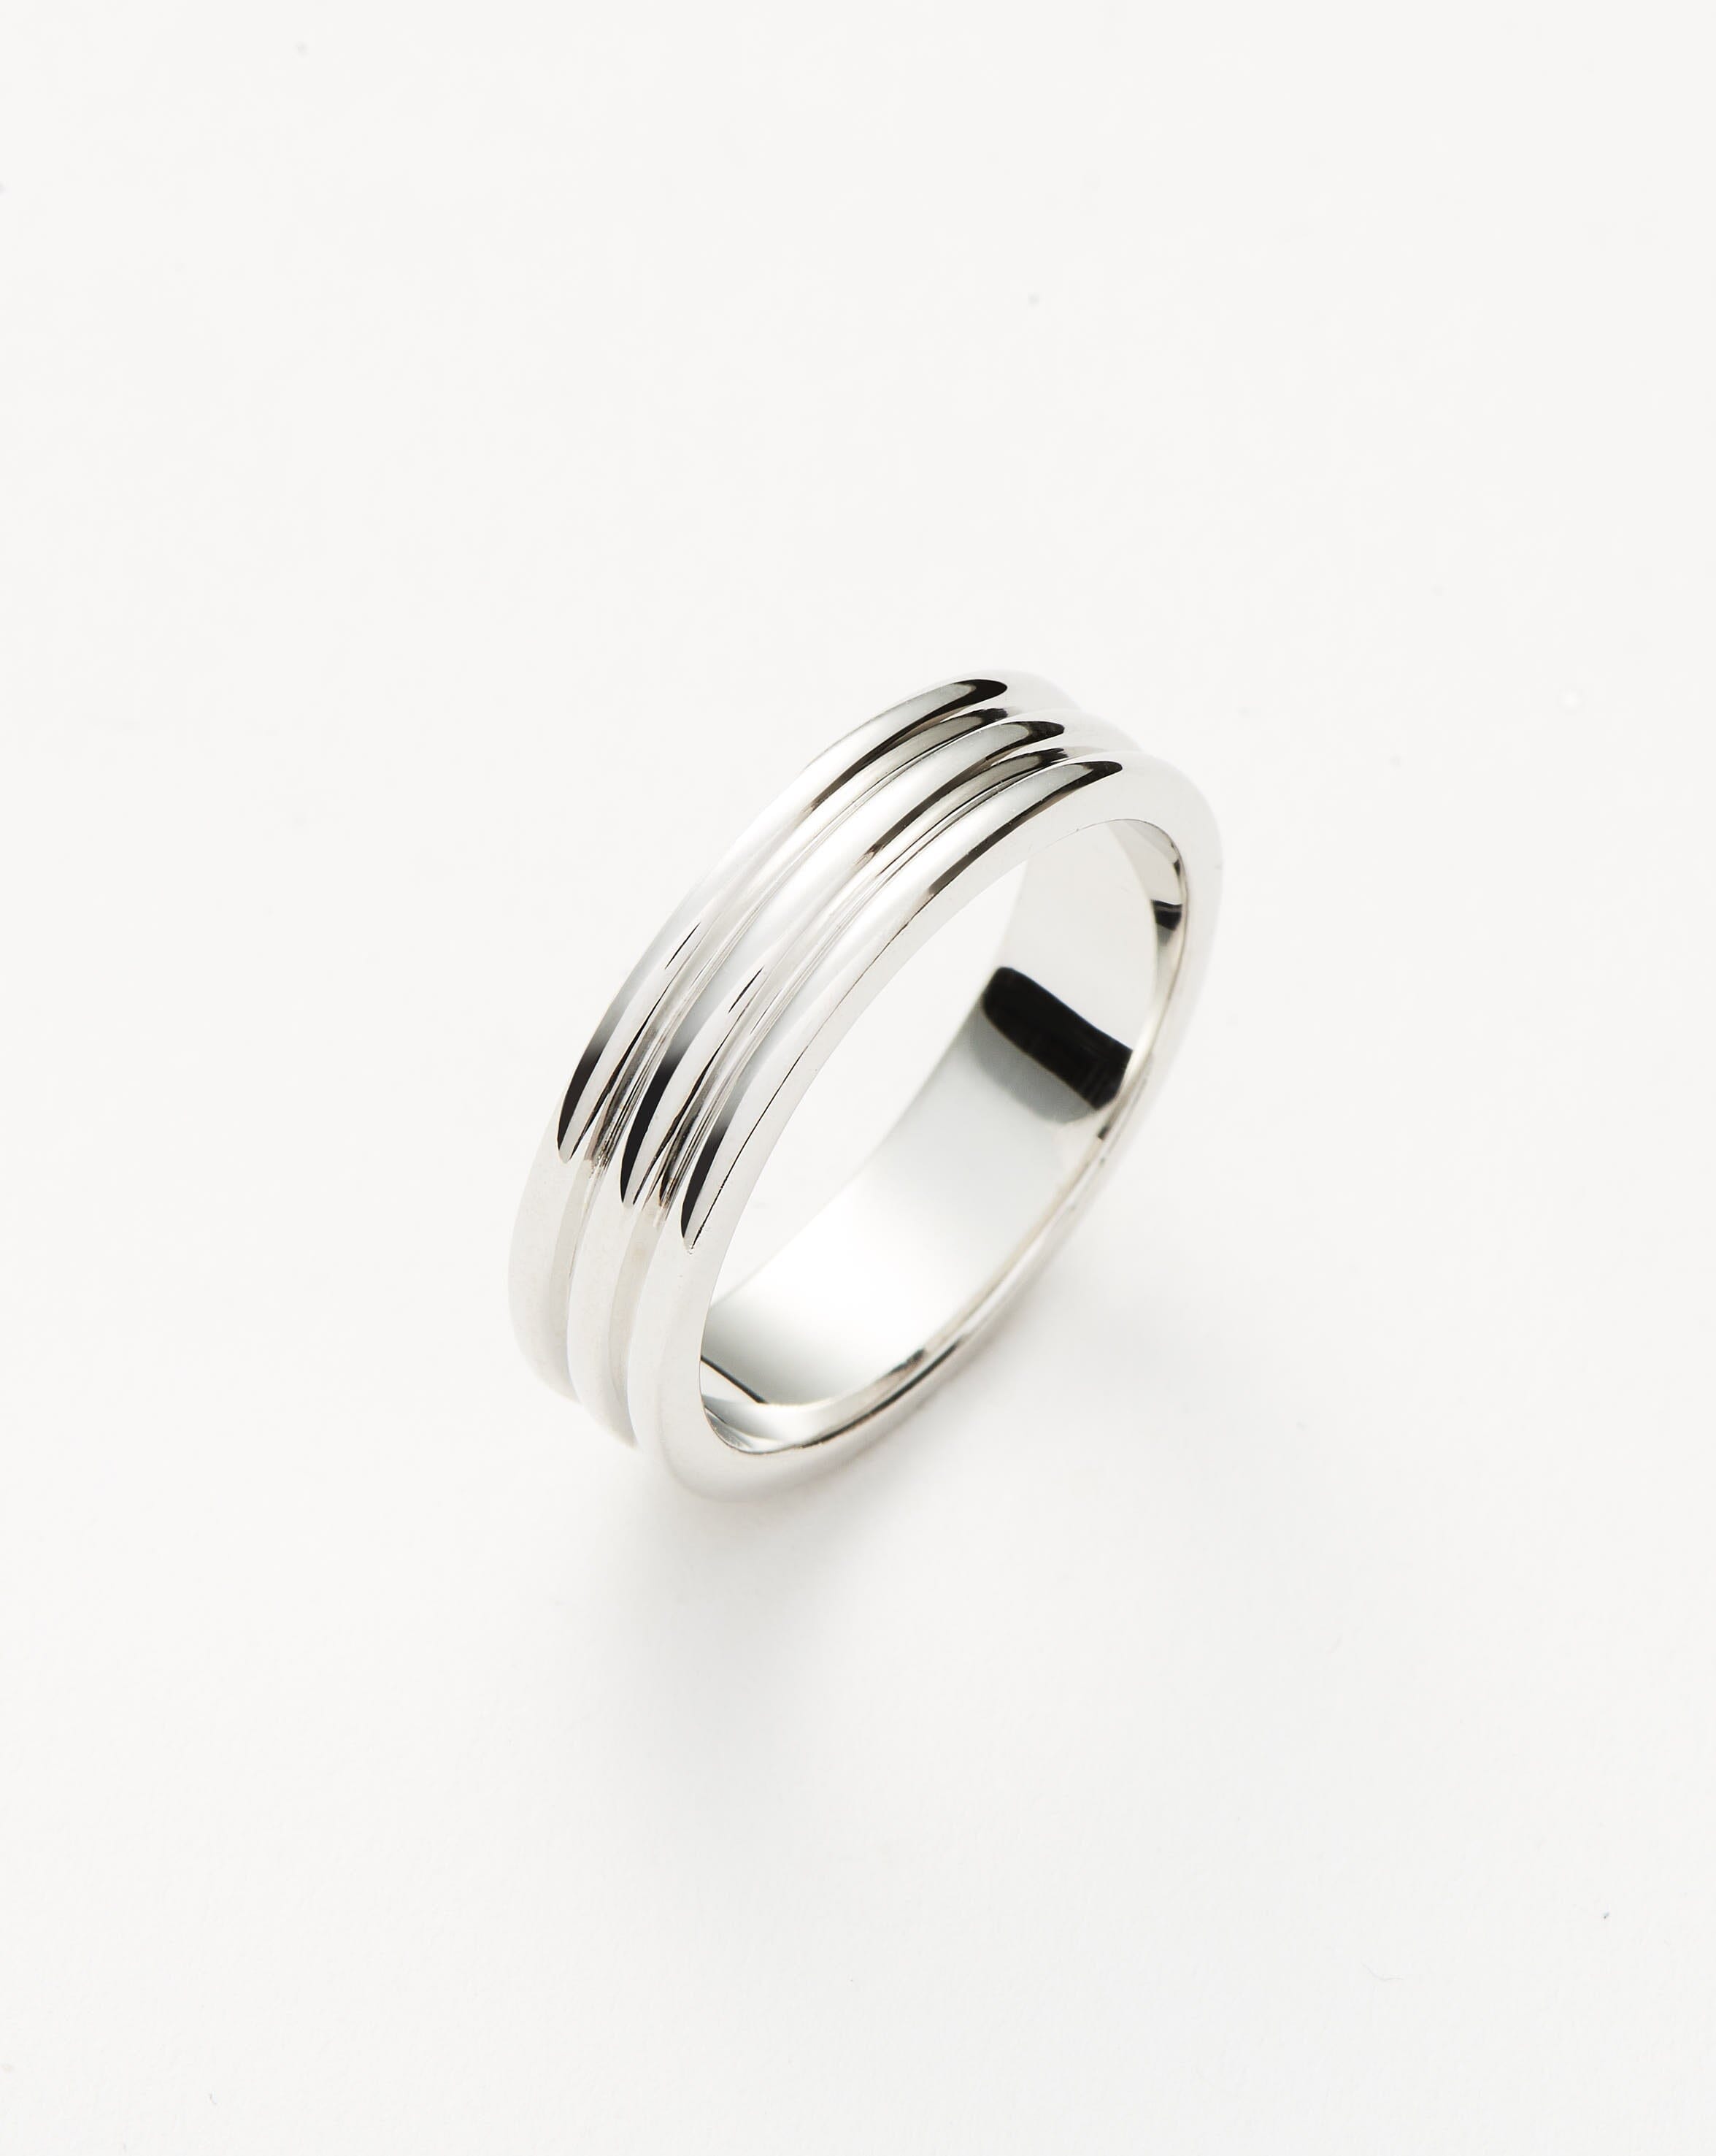 Men's Classic Ring, Sterling Silver Rings